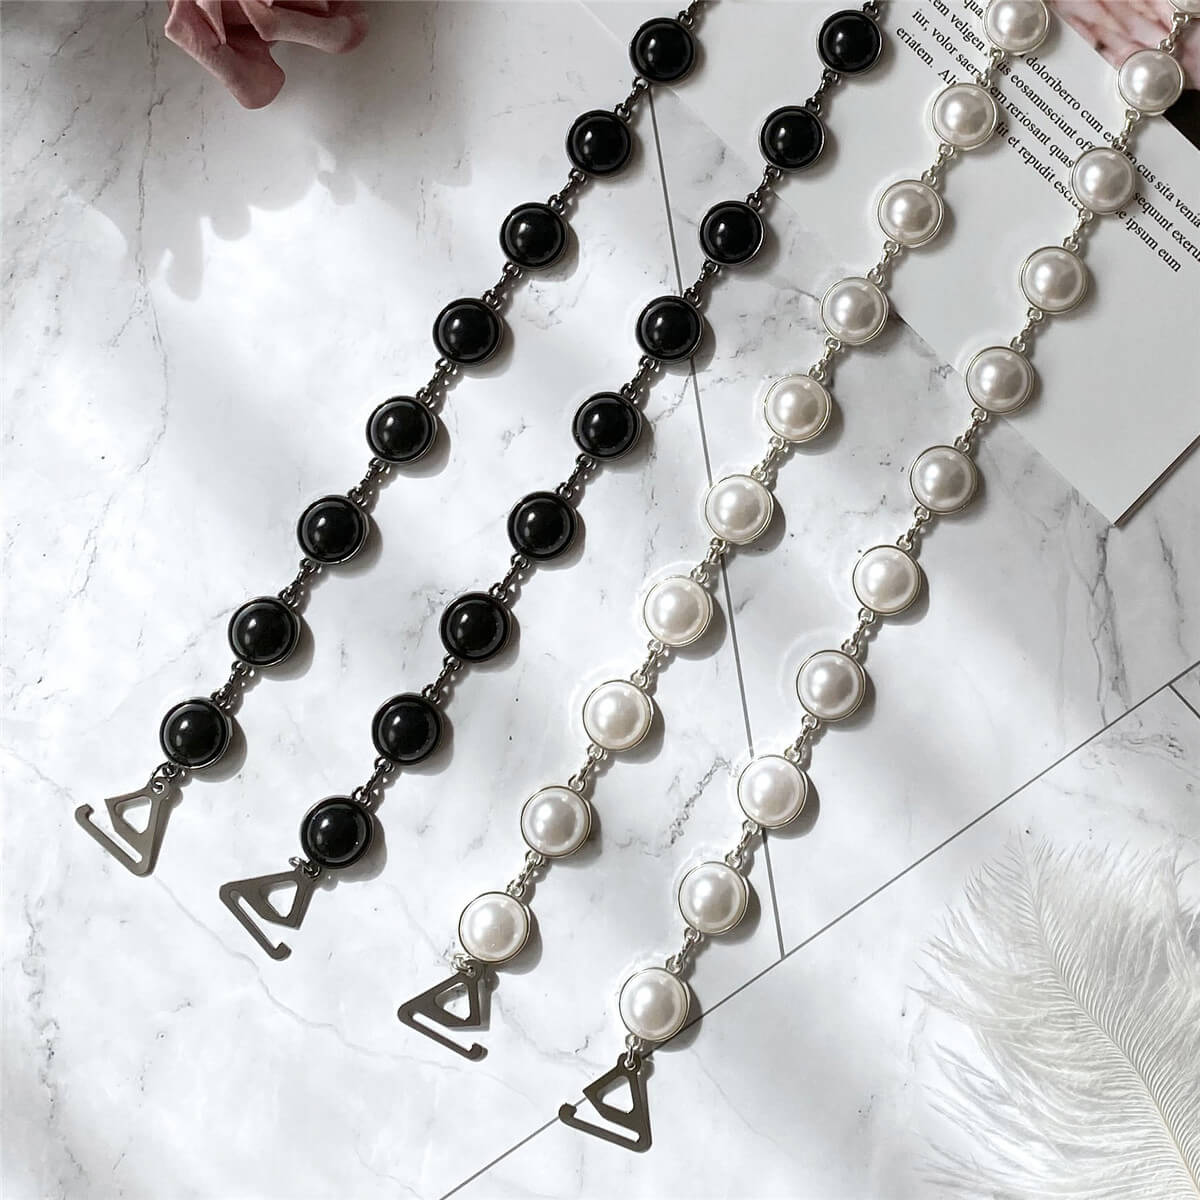 Decorative bra straps with white pearls and crystals